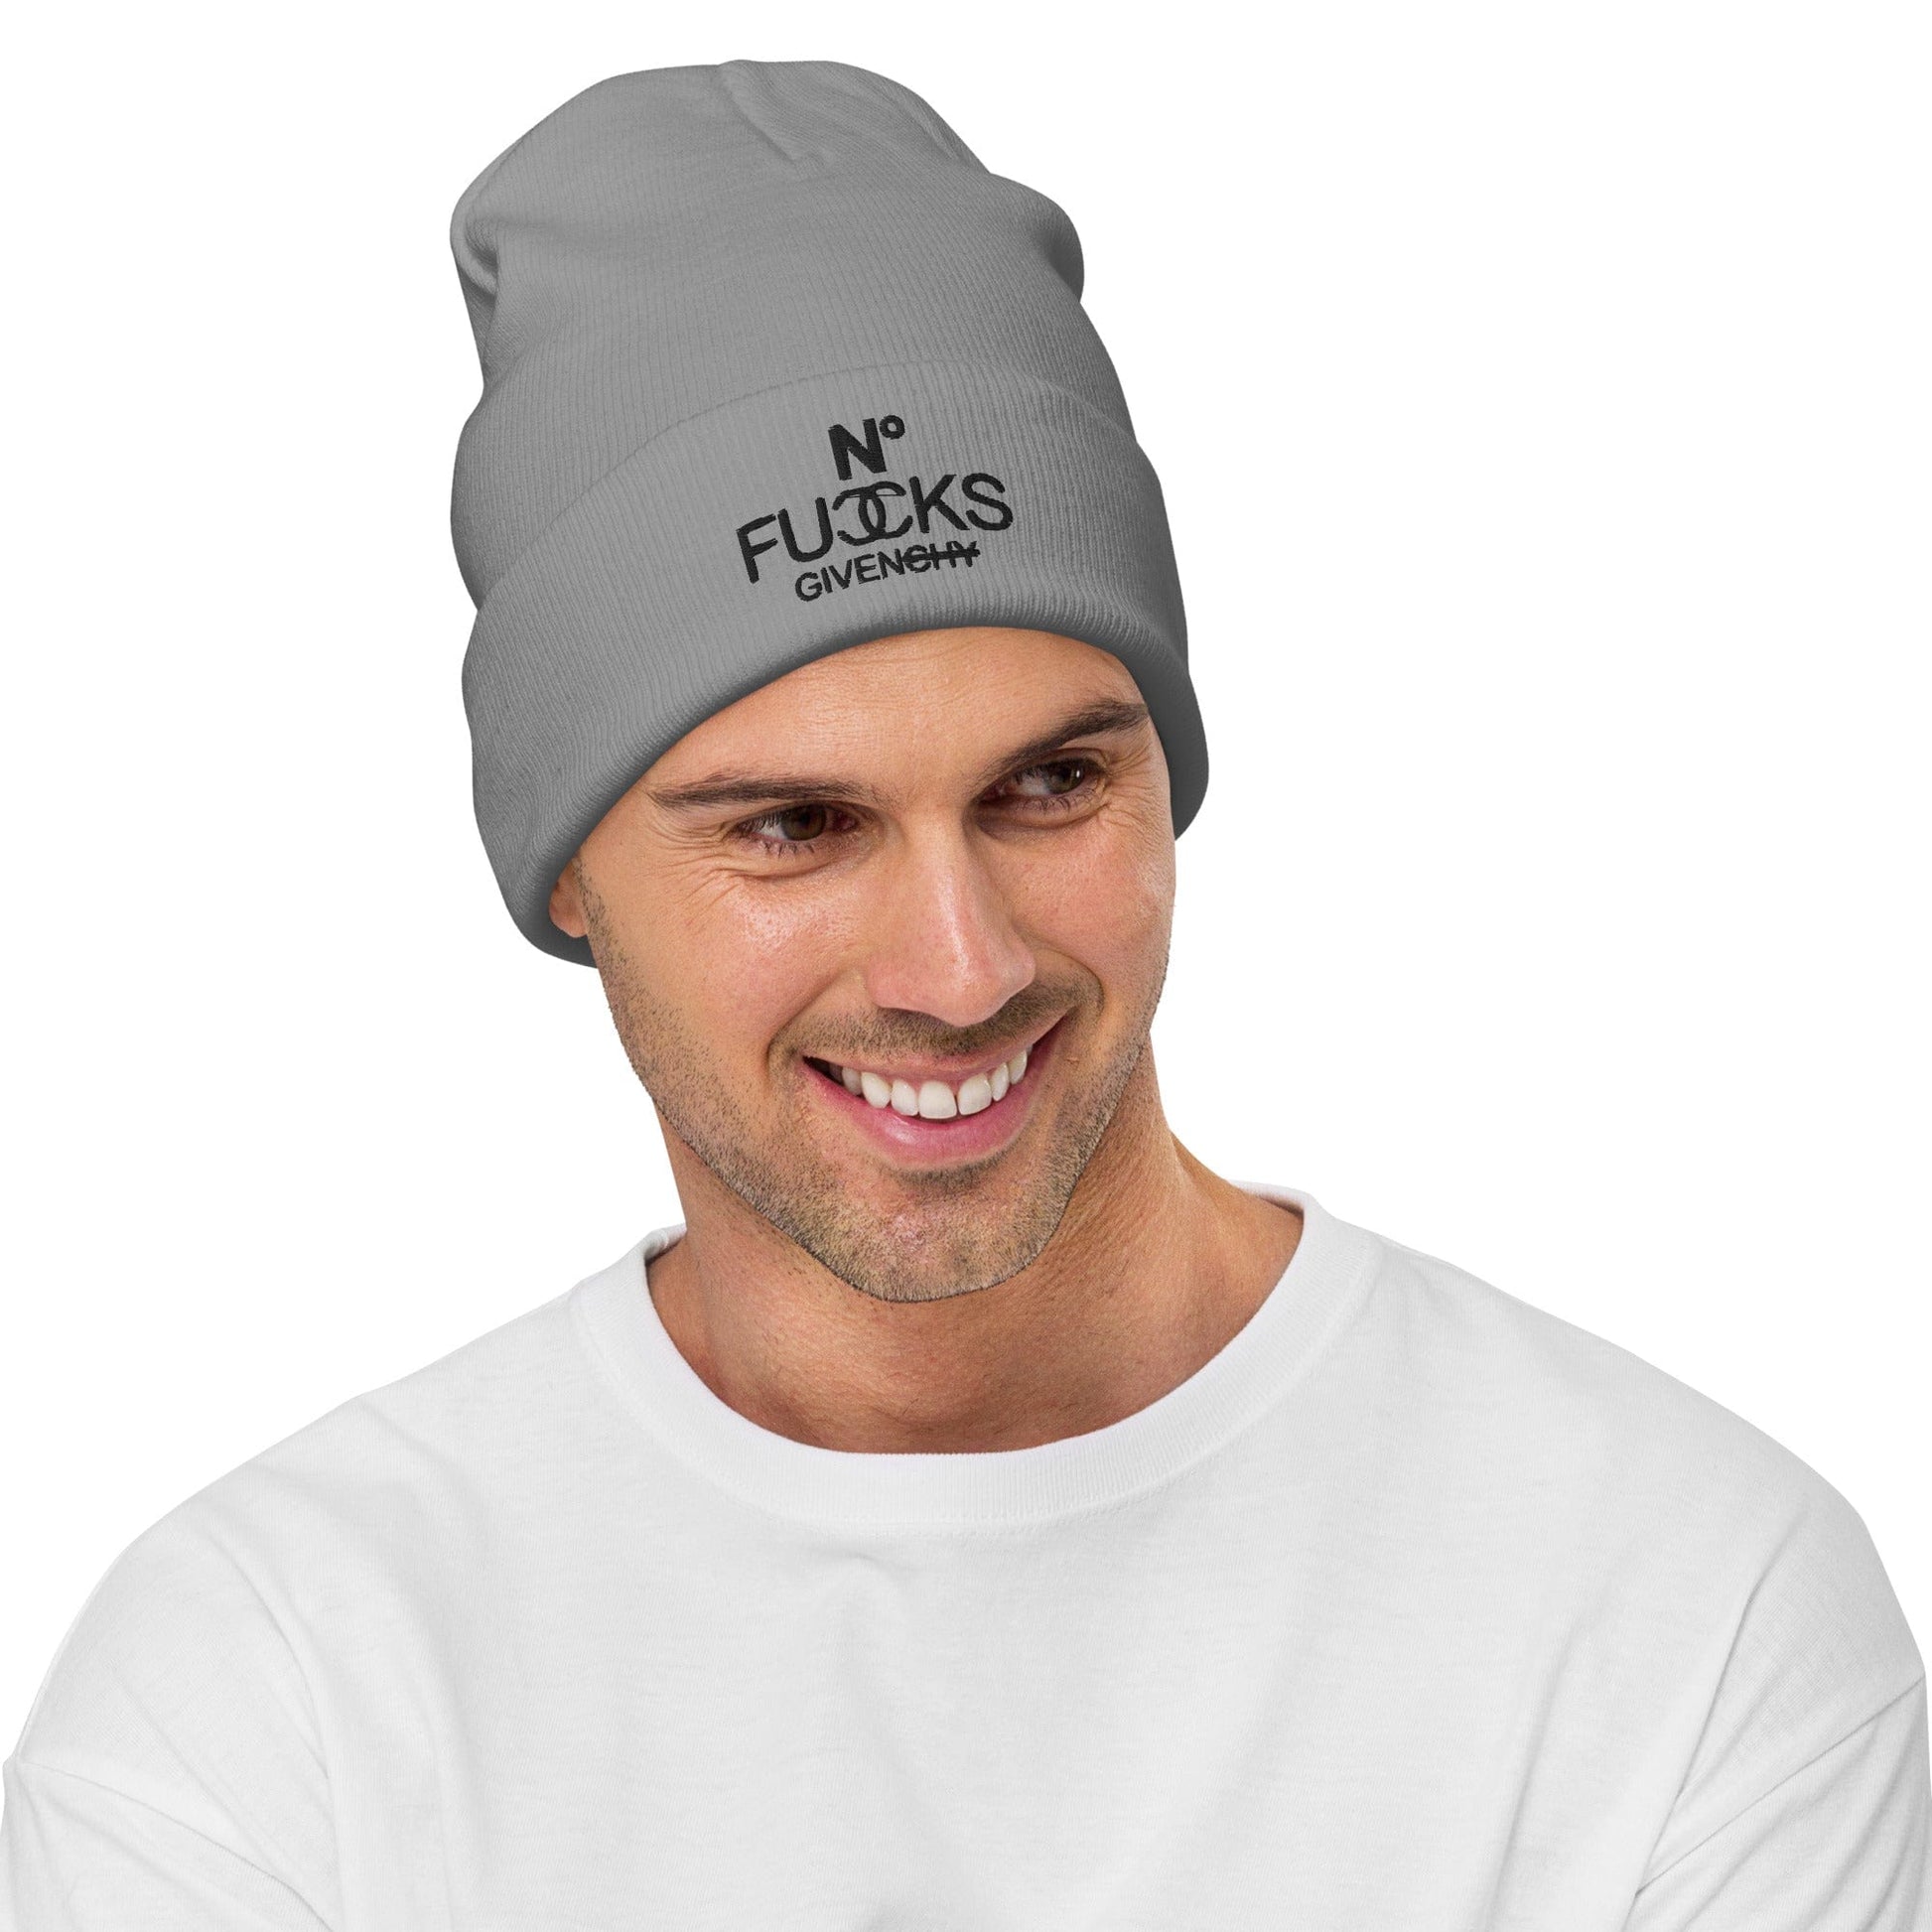 InsensitiviTees™️ Gray No Fucks Given Embroidered Beanie